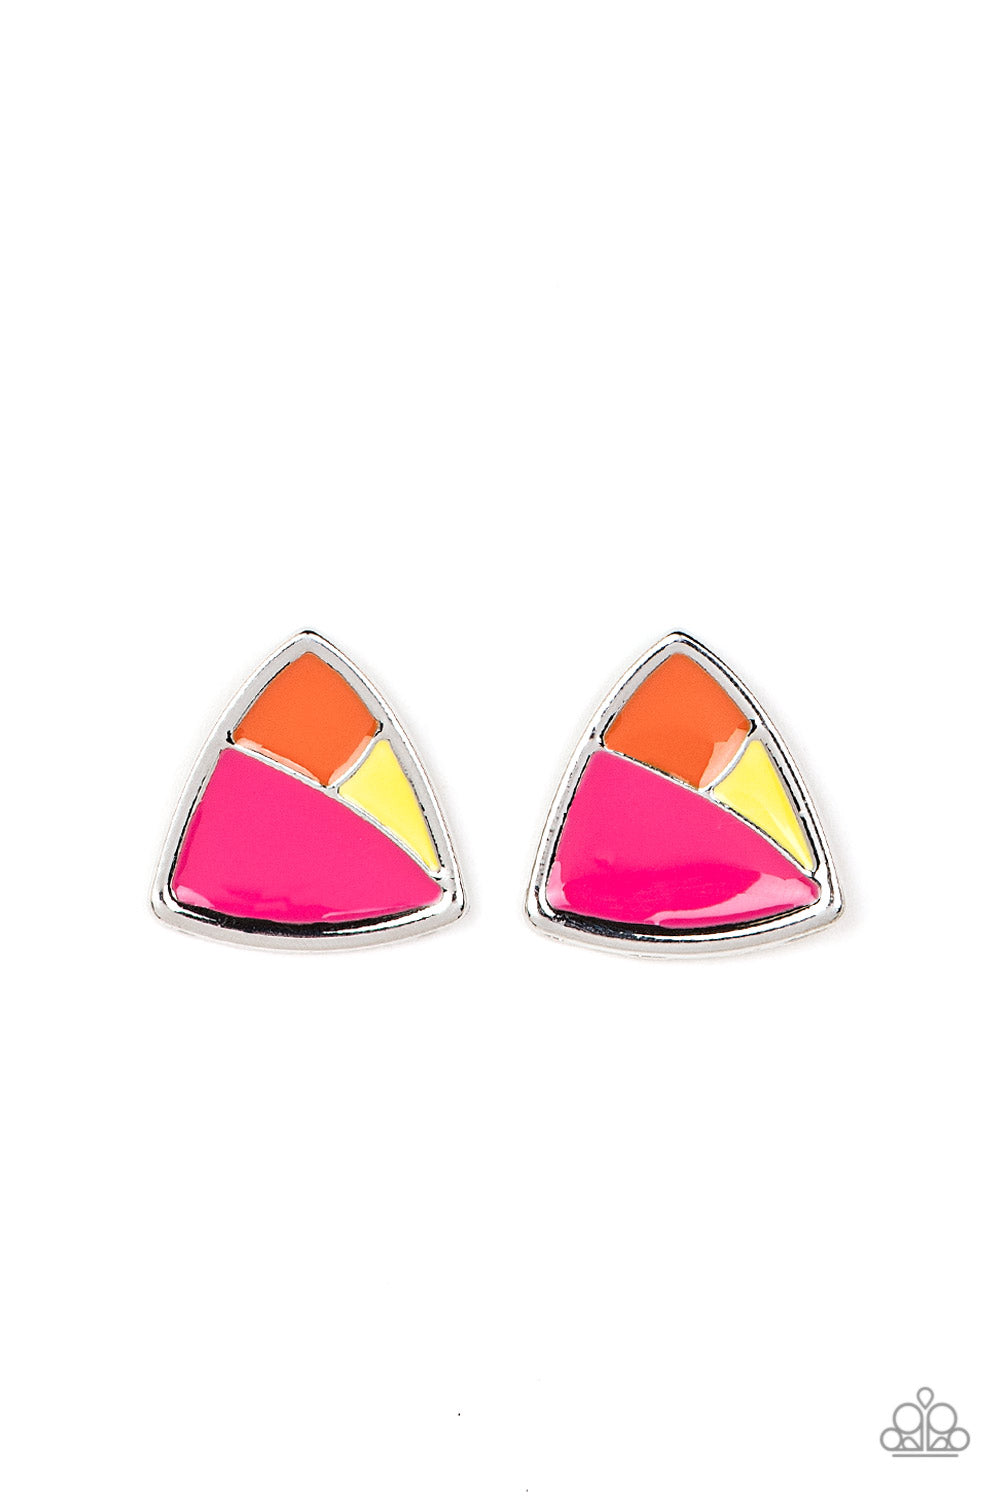 Kaleidoscopic Collision Multi Post Earring - Paparazzi Accessories  A collision of Daffodil, Innuendo, and orange painted accents beam inside an asymmetric triangular frame for a contemporary pop of color. Earring attaches to a standard post fitting.  Sold as one pair of post earrings.  P5PO-MTXX-077XX